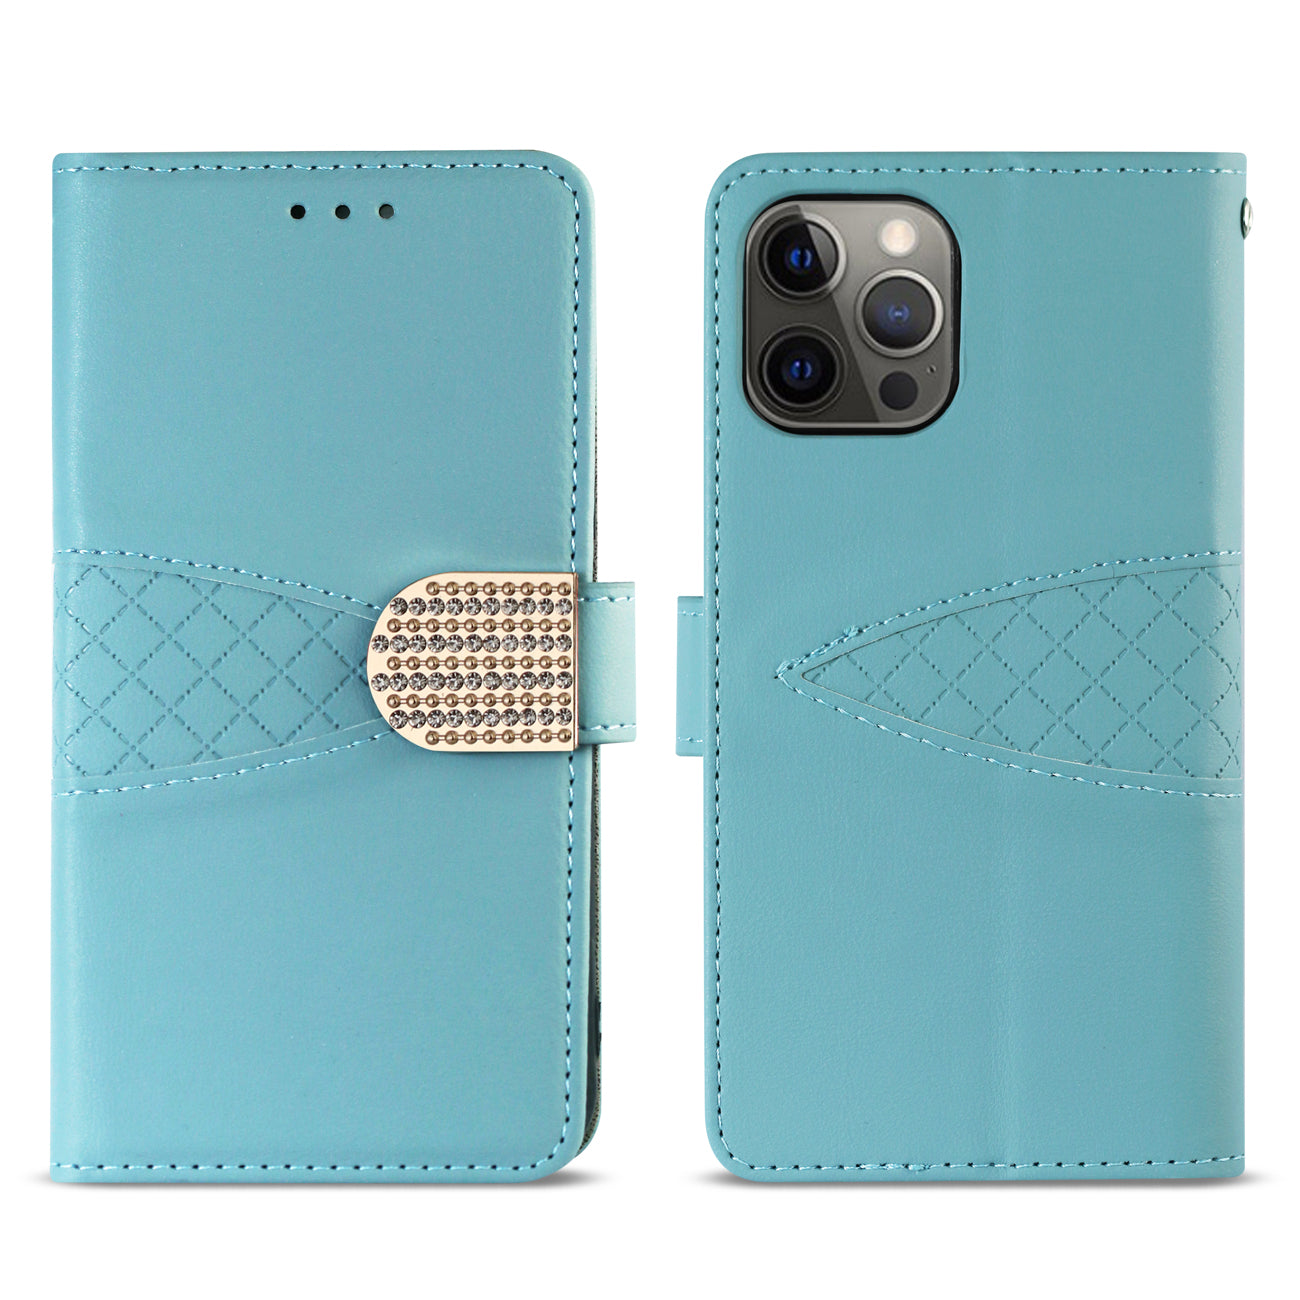 Reiko 3-In-1 Wallet Case for IPHONE 12/ IPHONE 12 PRO In Blue